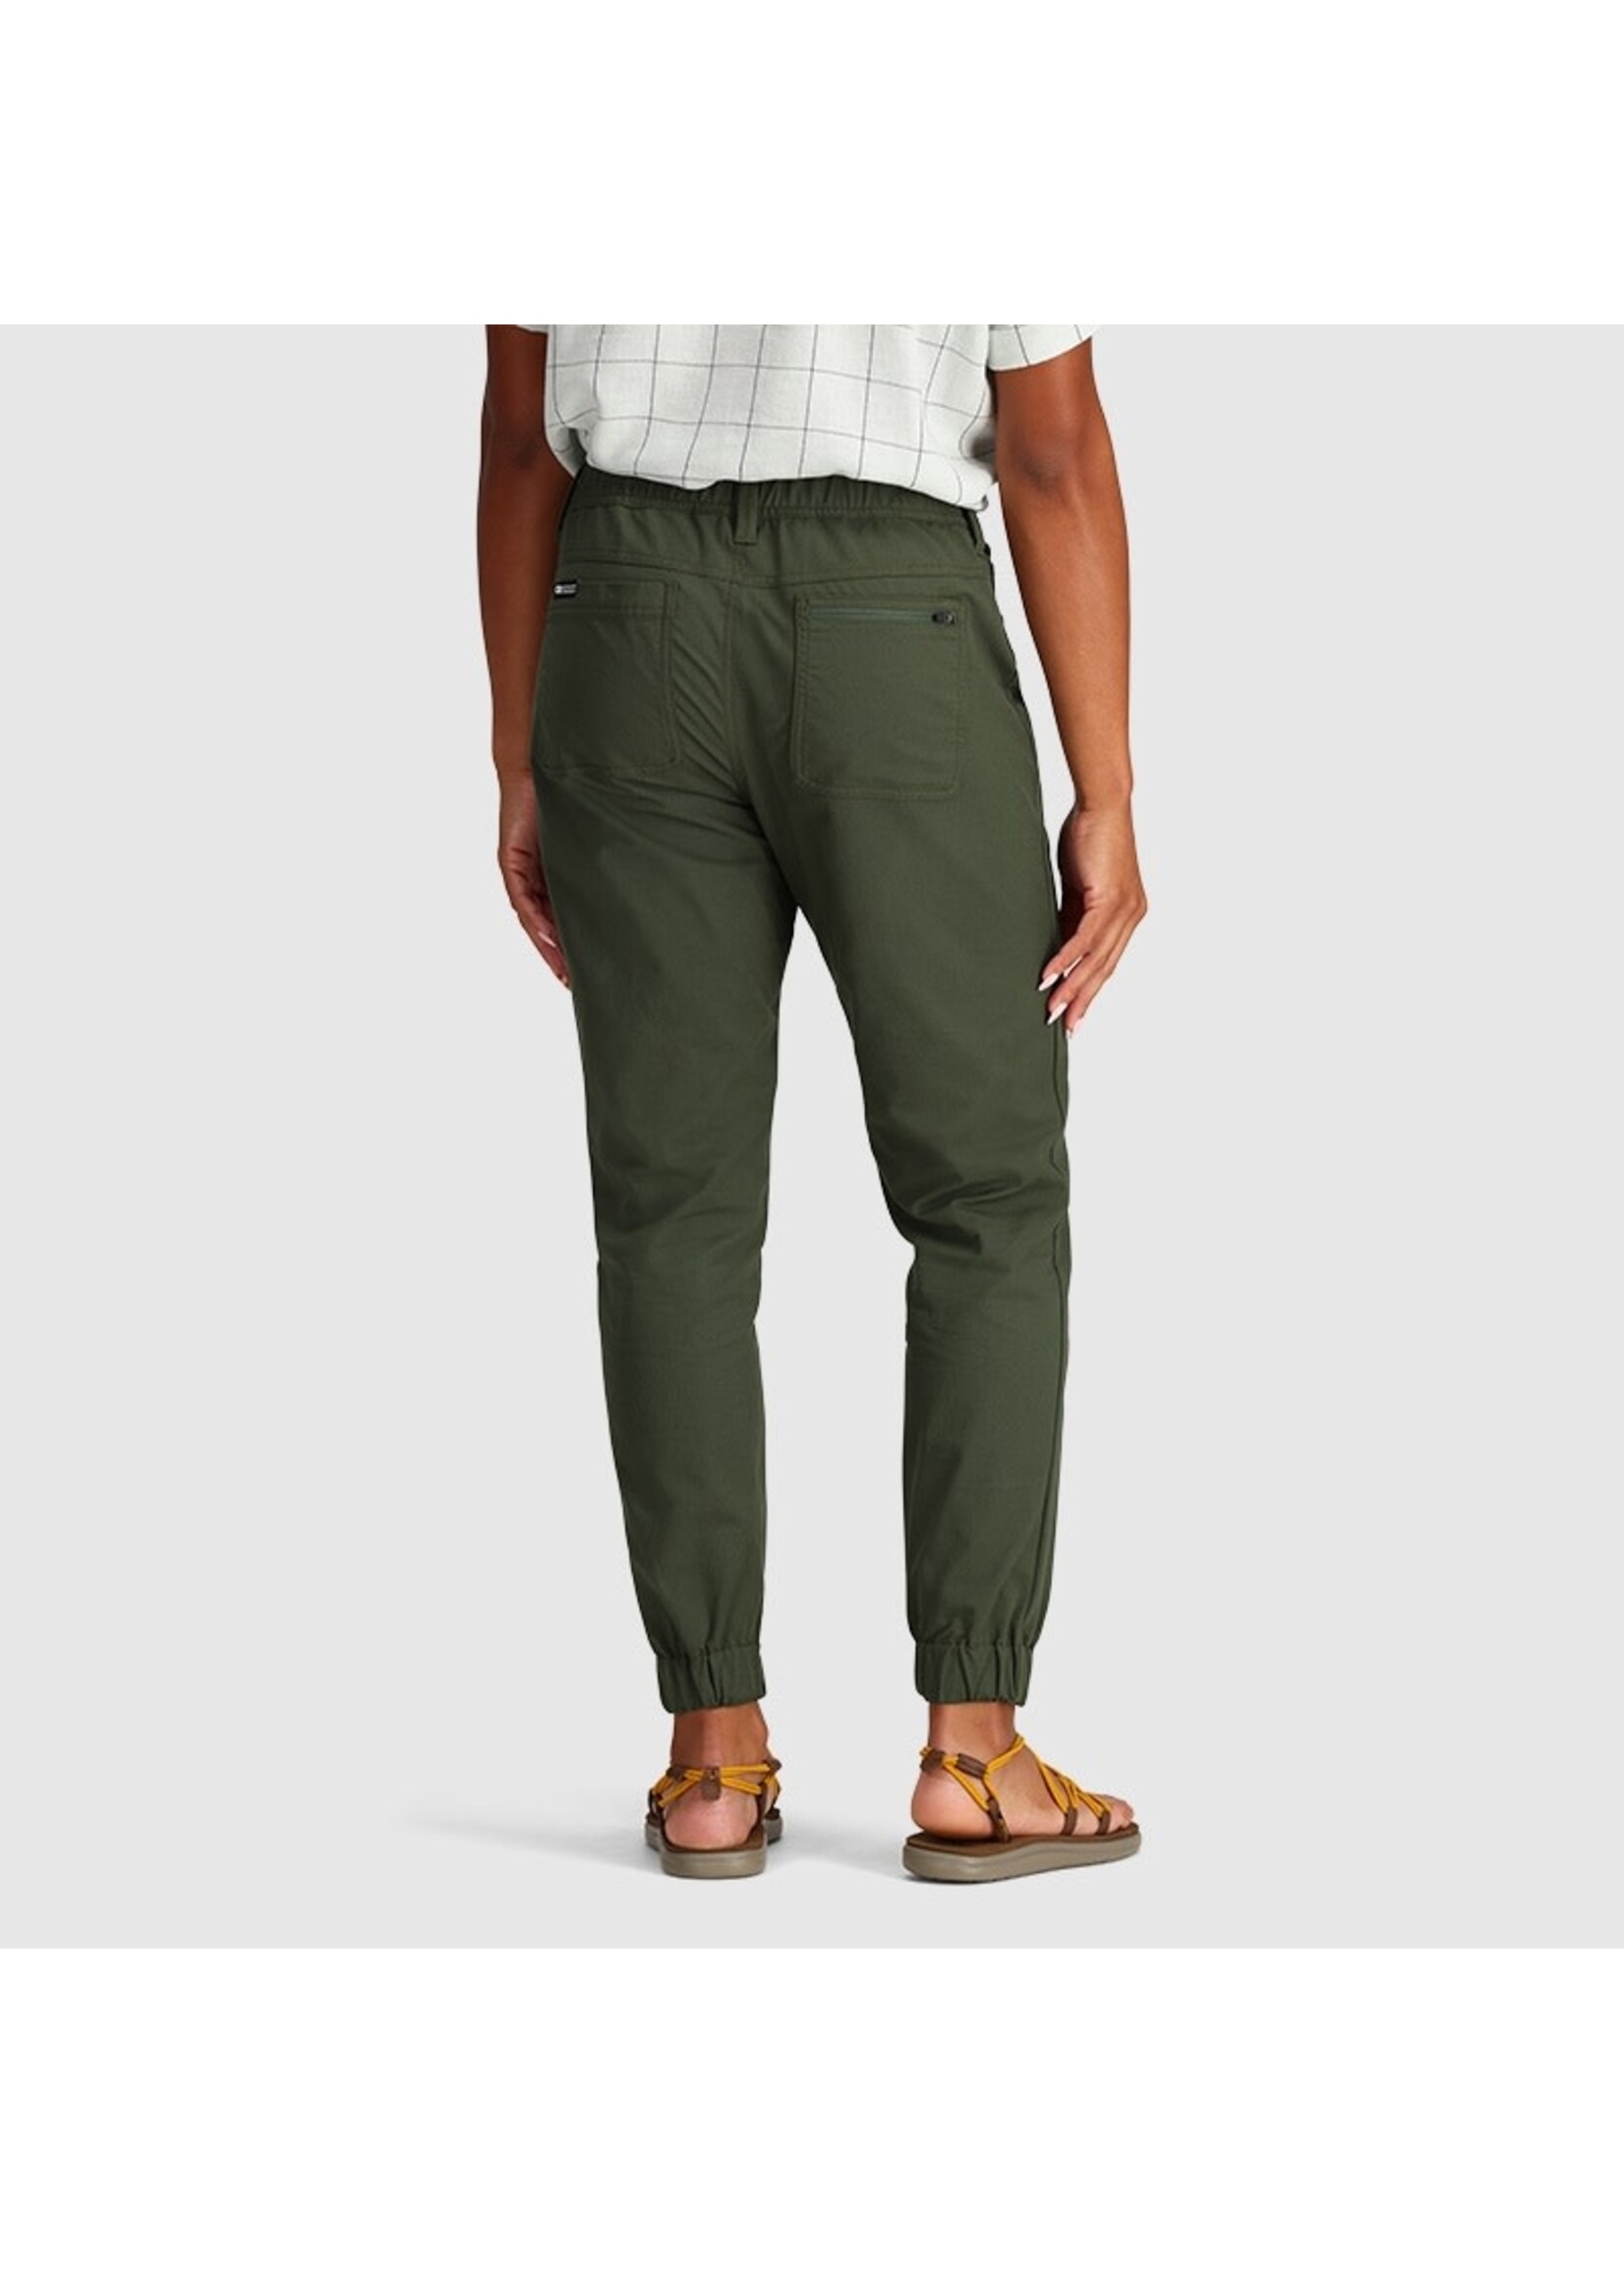 Outdoor Research Outdoor Research Canvas Joggers - Women